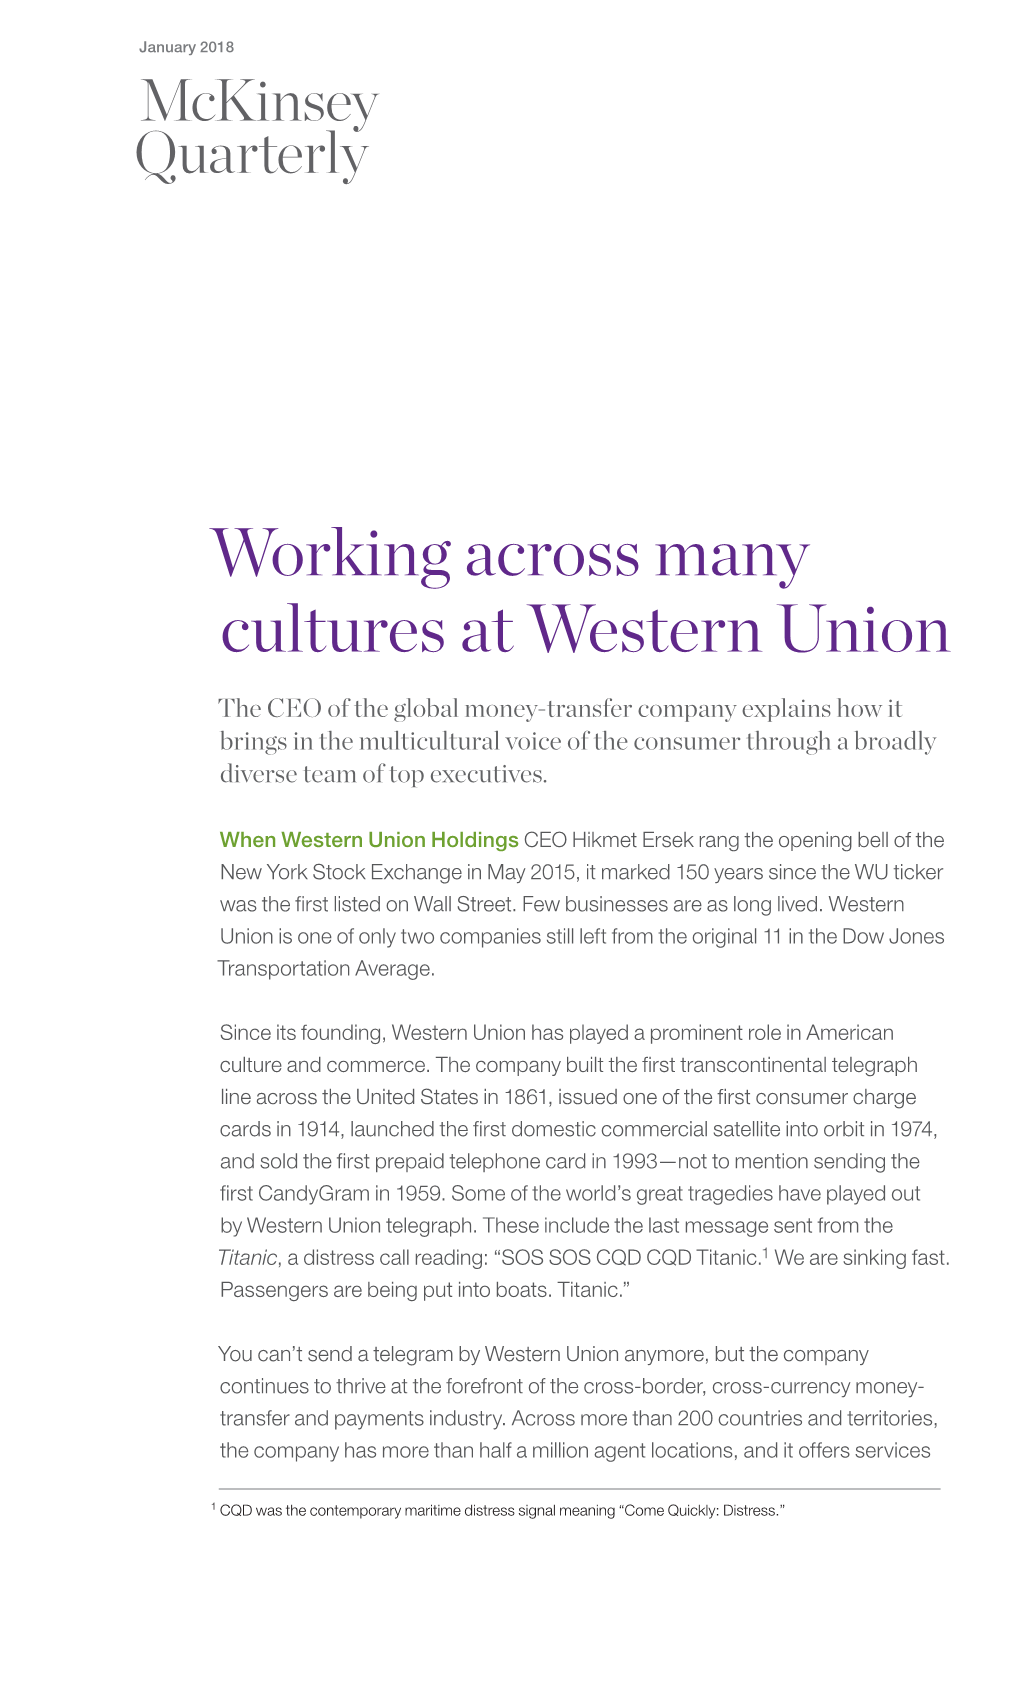 Working Across Many Cultures at Western Union